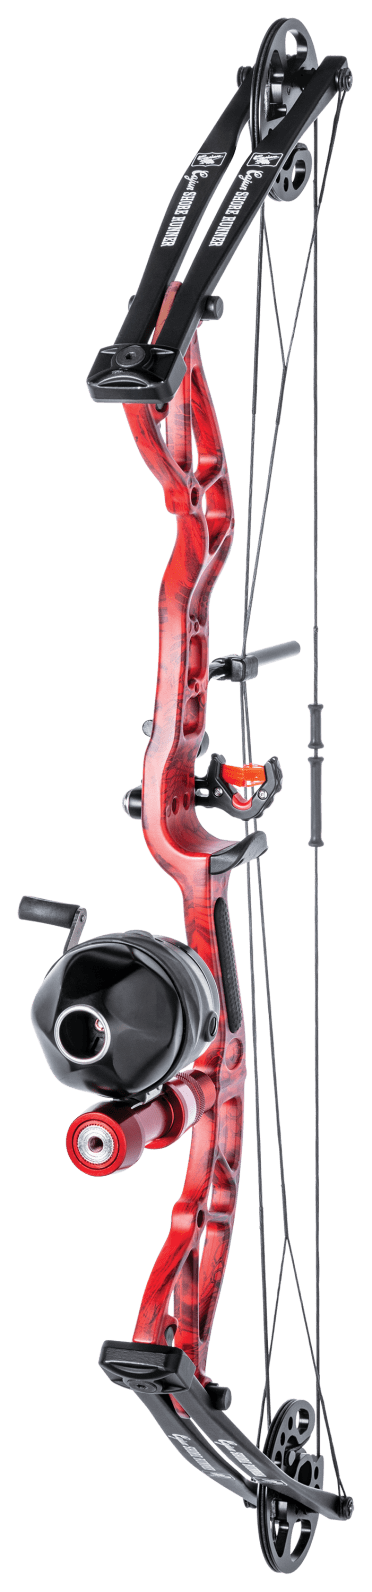 Cajun Bowfishing Sucker Punch Pro RTF Compound Bow Package